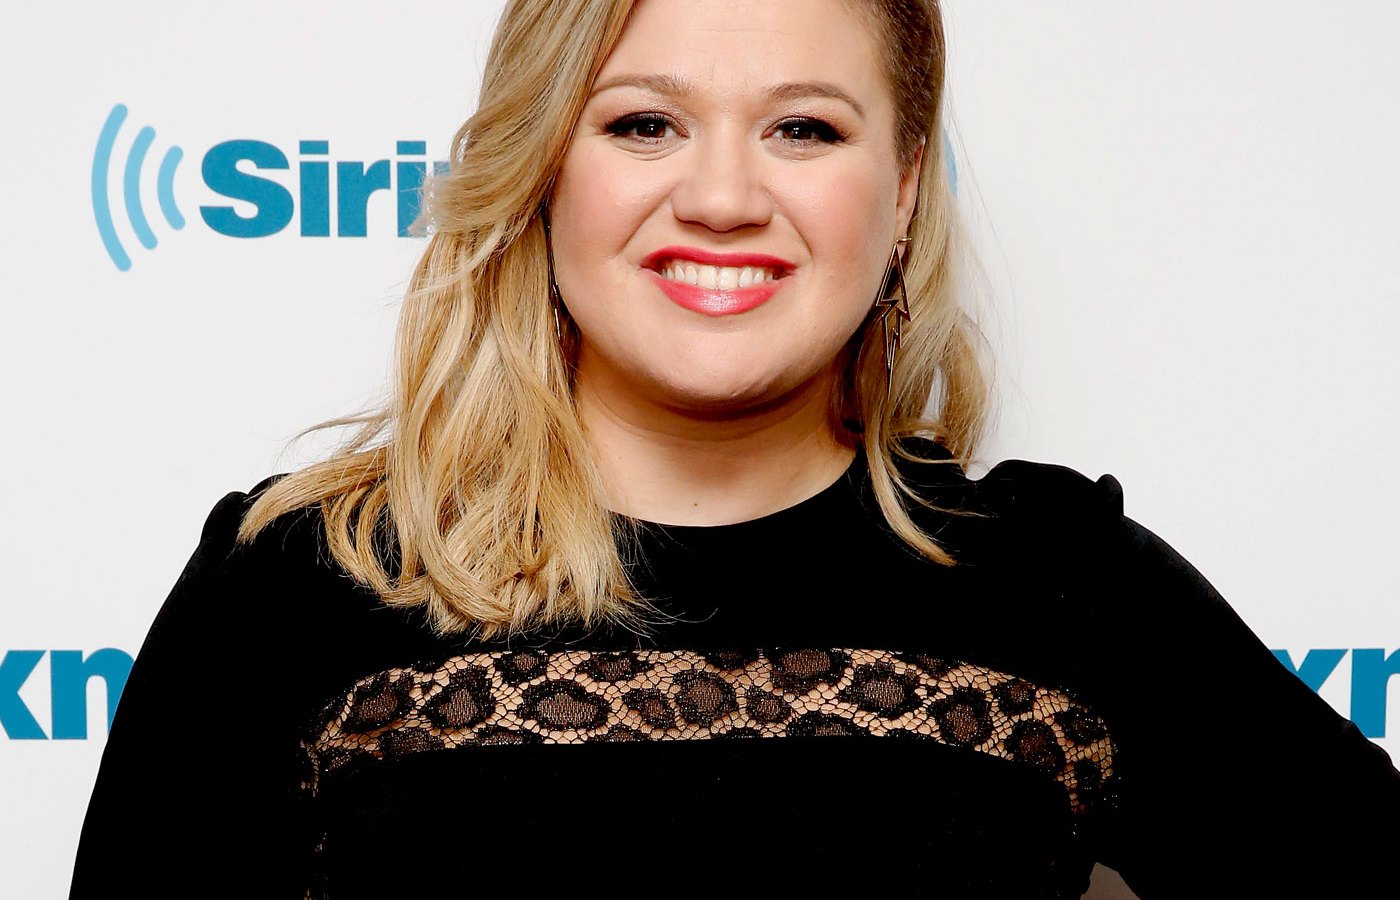 Kelly Clarkson won't let anyone put her down!